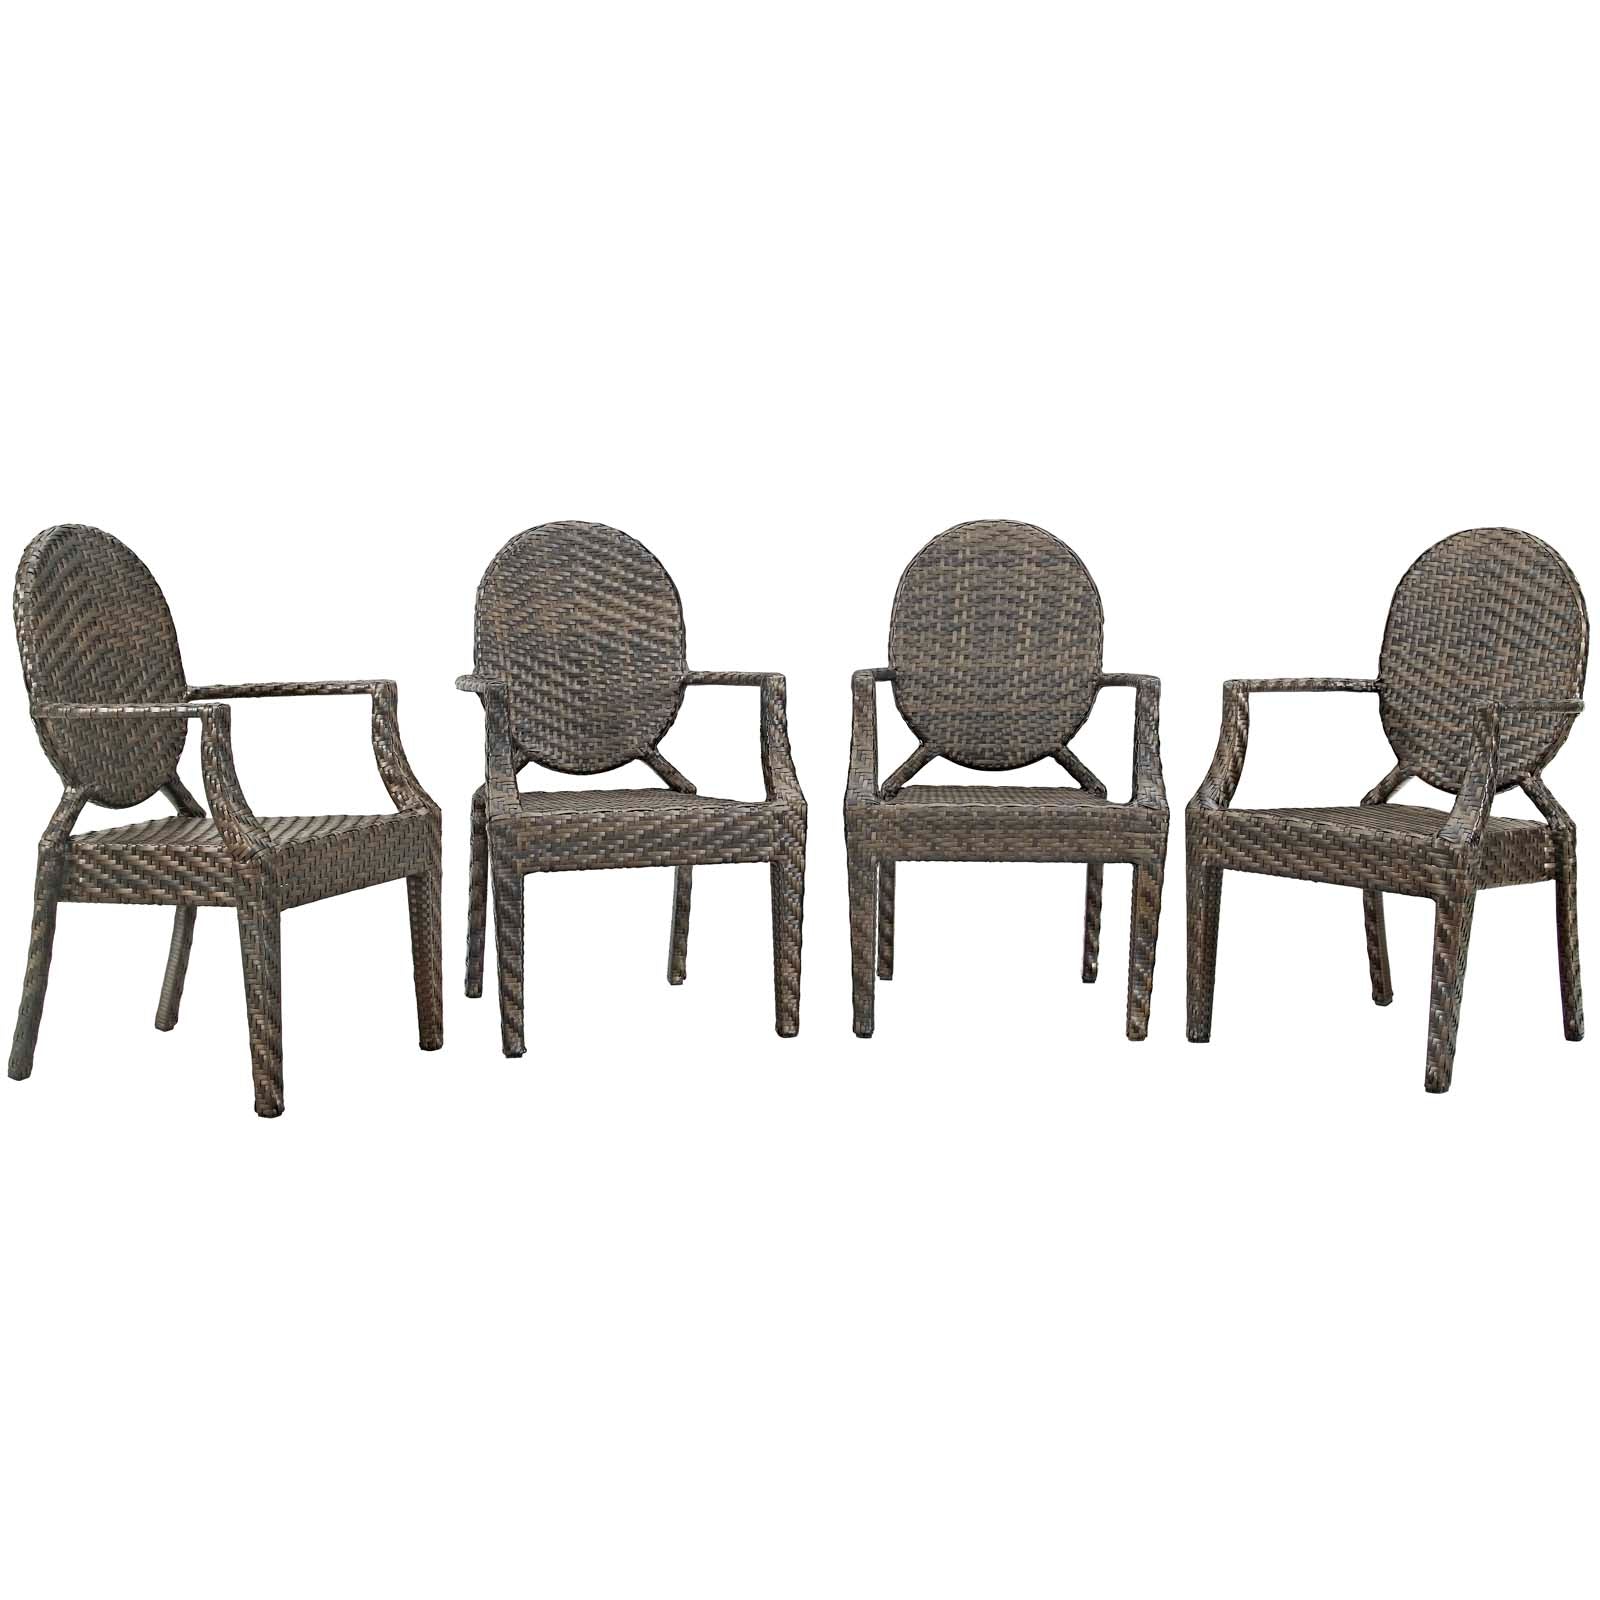 Casper Outdoor Patio Dining Armchair Set of 4 - East Shore Modern Home Furnishings